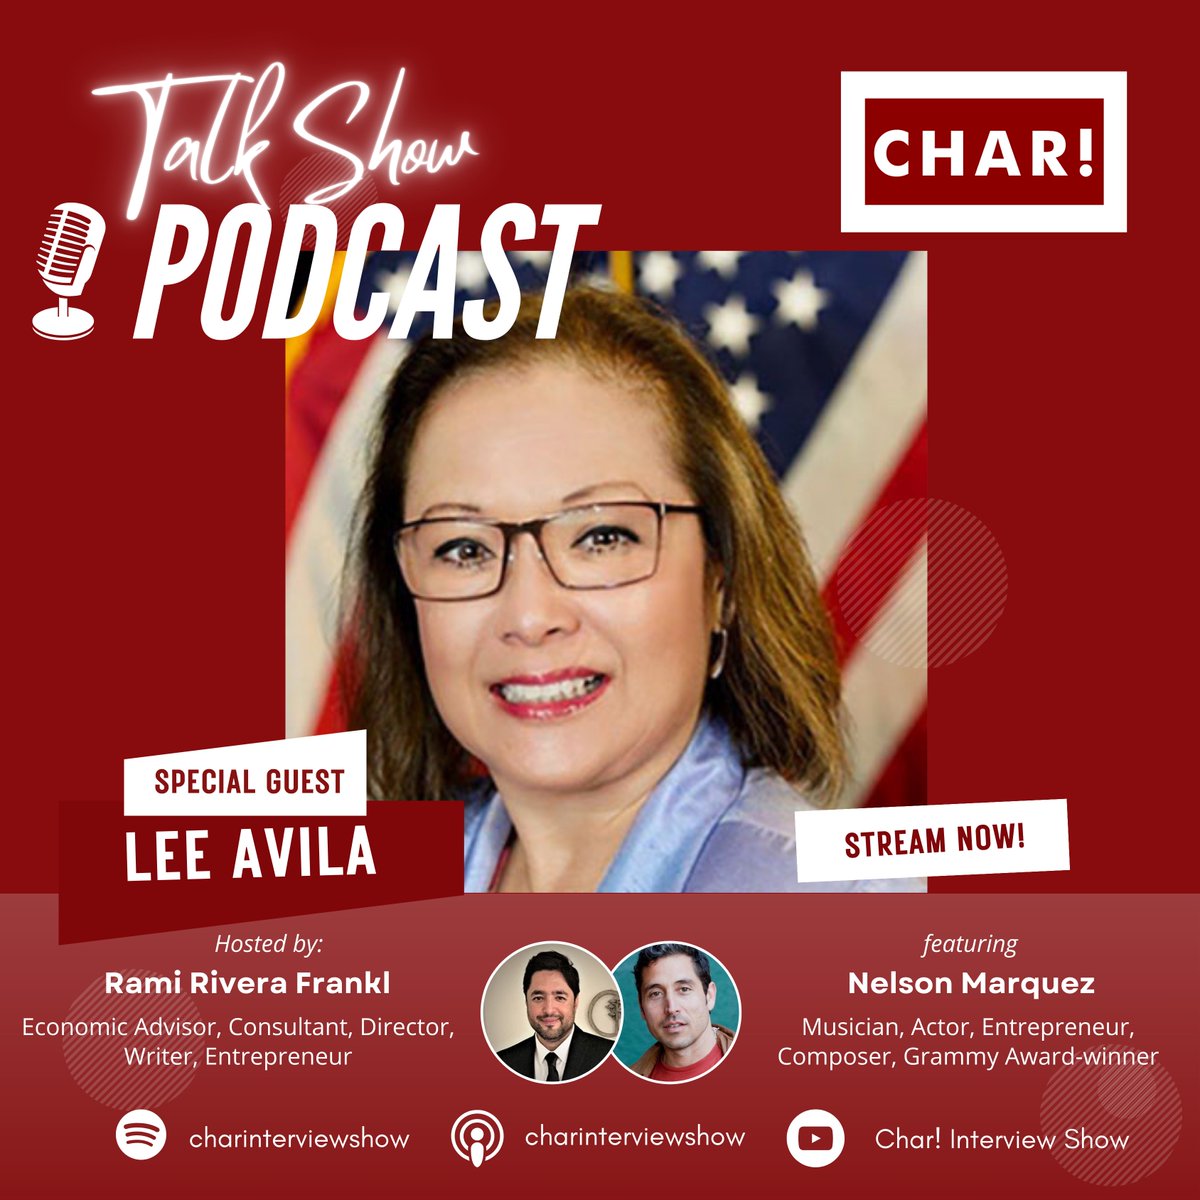 🎧 Dive into inspiration with our latest podcast episode featuring Lee Avila! 🌟 Stream now and be motivated by her journey. Youtube: bit.ly/3QnDfoN Spotify: spoti.fi/40k0wg2 Apple Podcast: apple.co/3FKlsU5 #CharPodcast #LeeAvila #InspiringStories